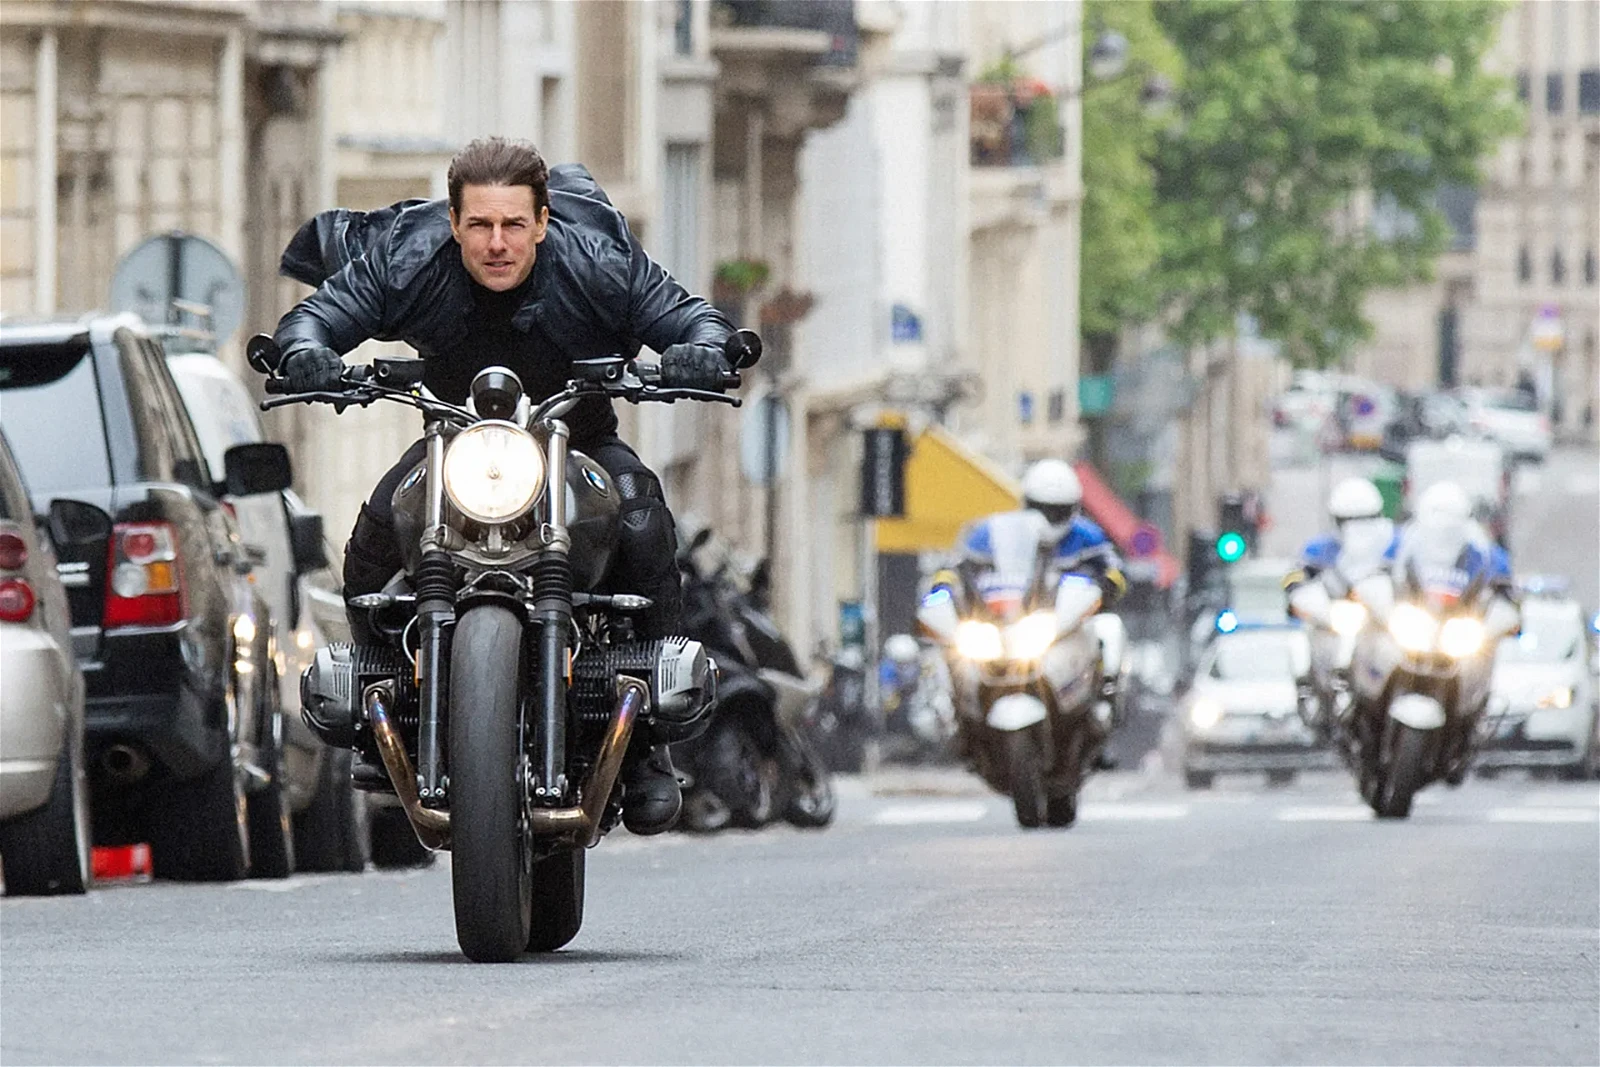 Hollywood franchise Mission Impossible